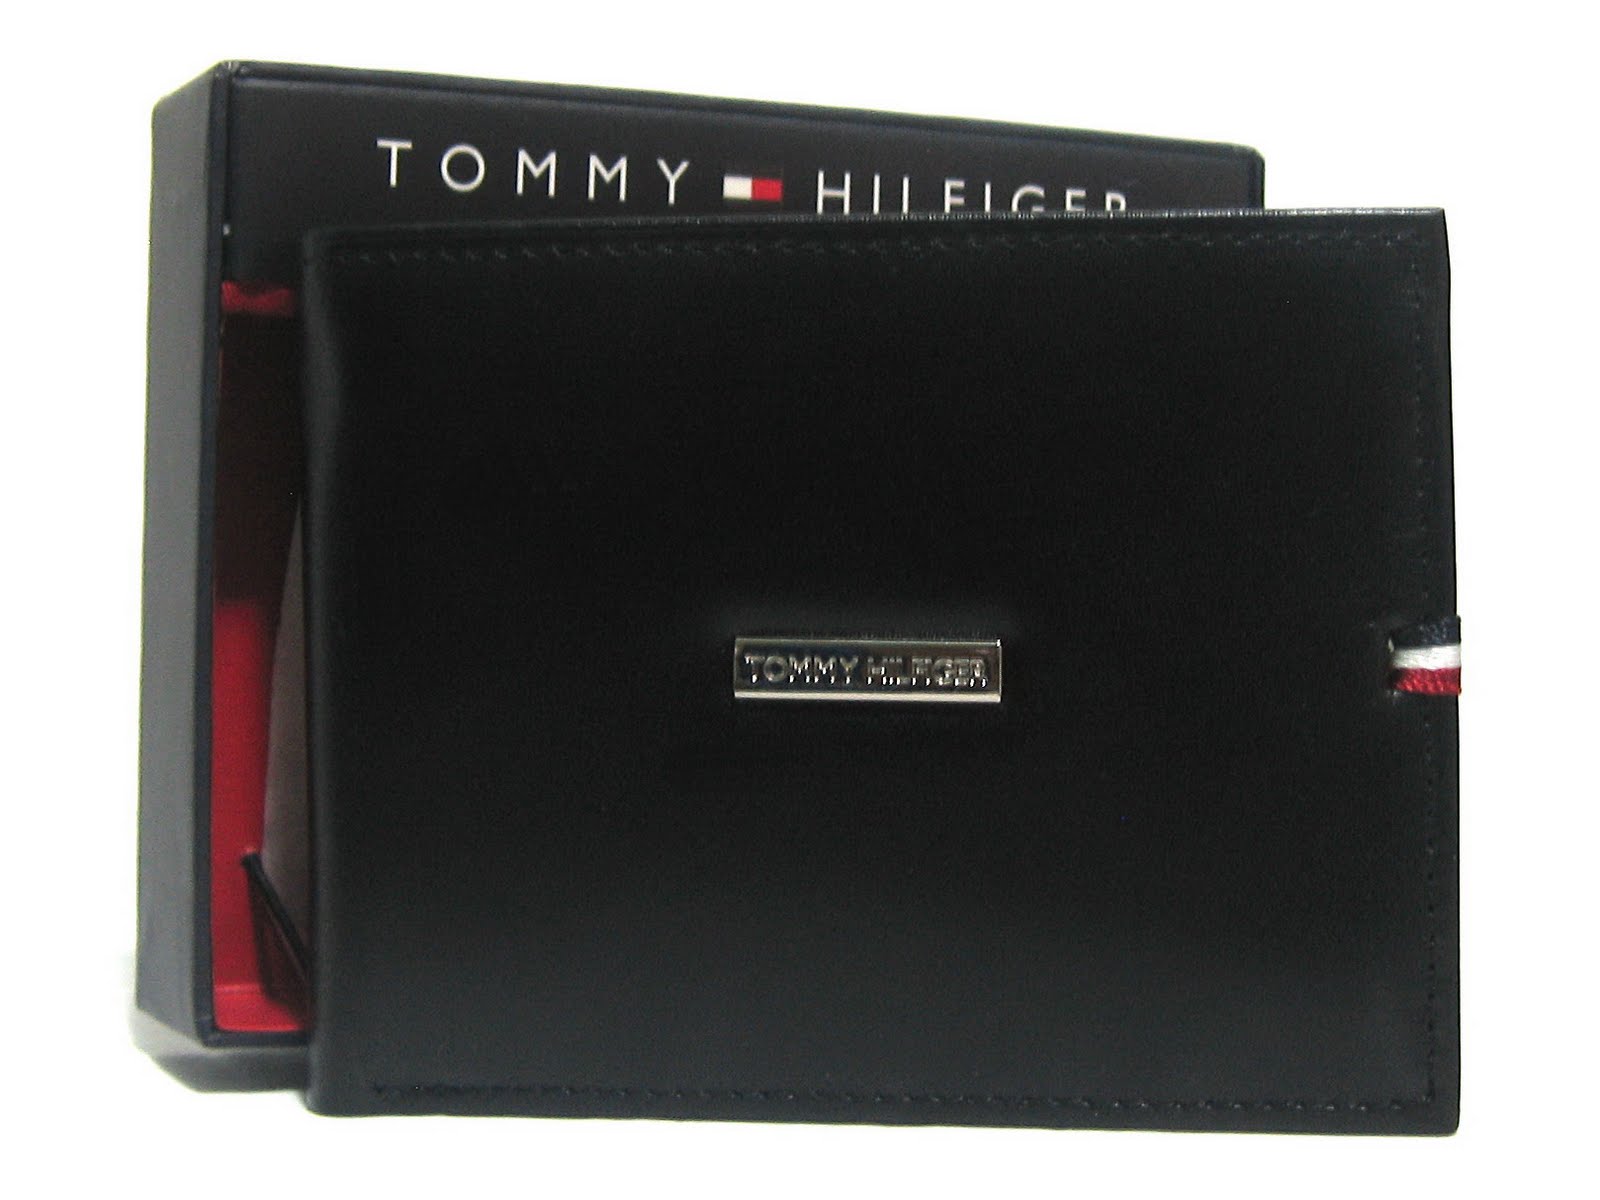 Boutique Malaysia: TOMMY HILFIGER MENS WALLET #220